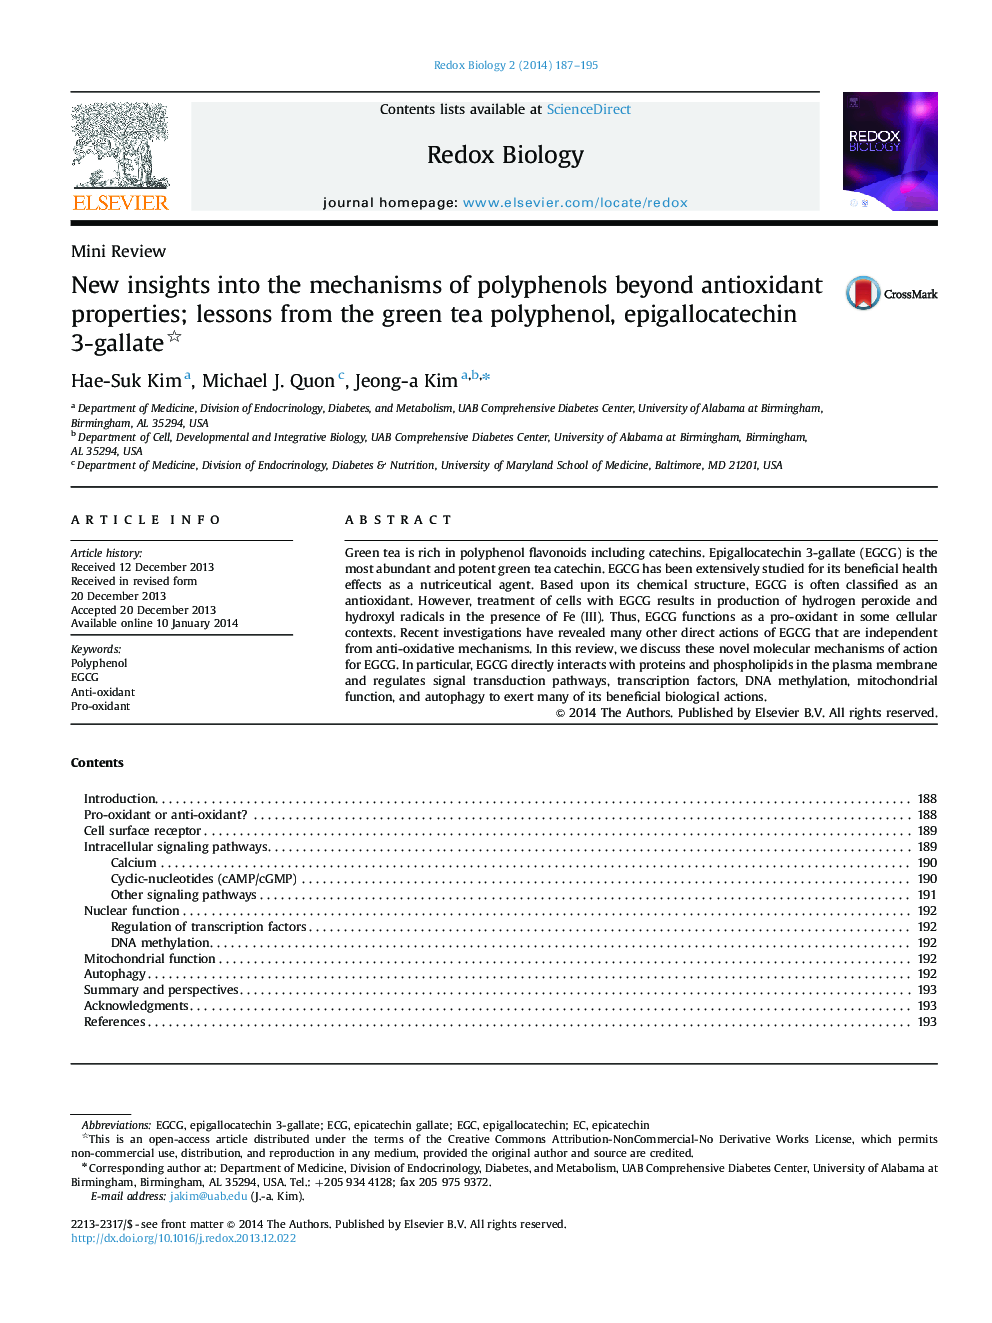 New insights into the mechanisms of polyphenols beyond antioxidant properties; lessons from the green tea polyphenol, epigallocatechin 3-gallate 